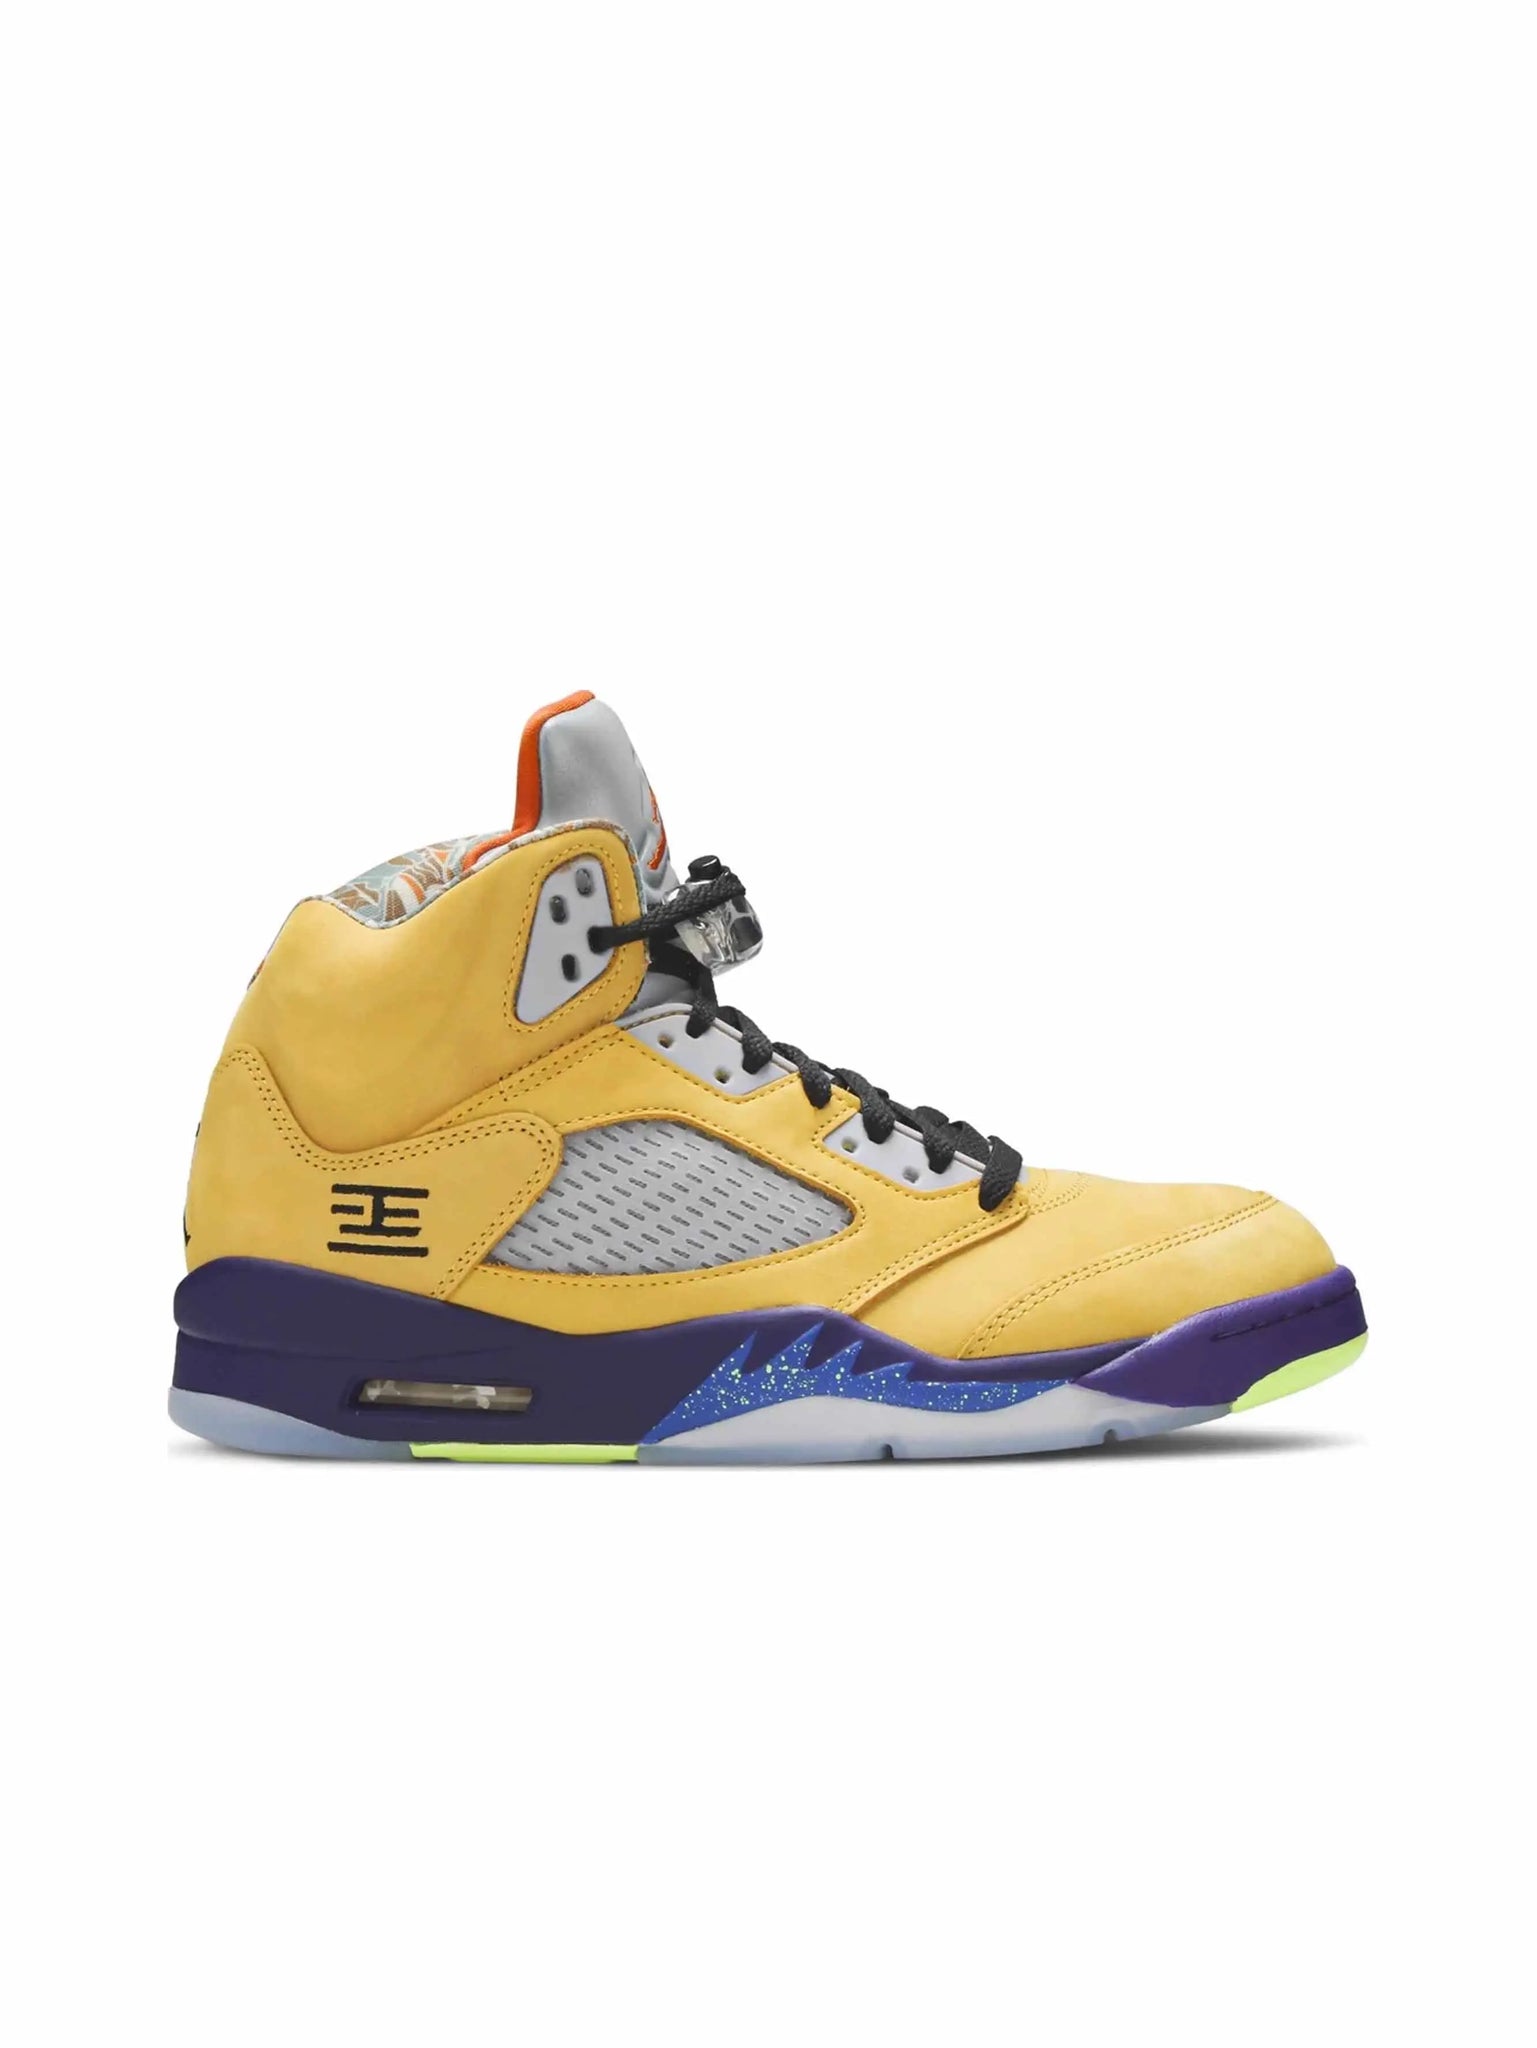 Nike Air Jordan 5 Retro What The in Auckland, New Zealand - Shop name